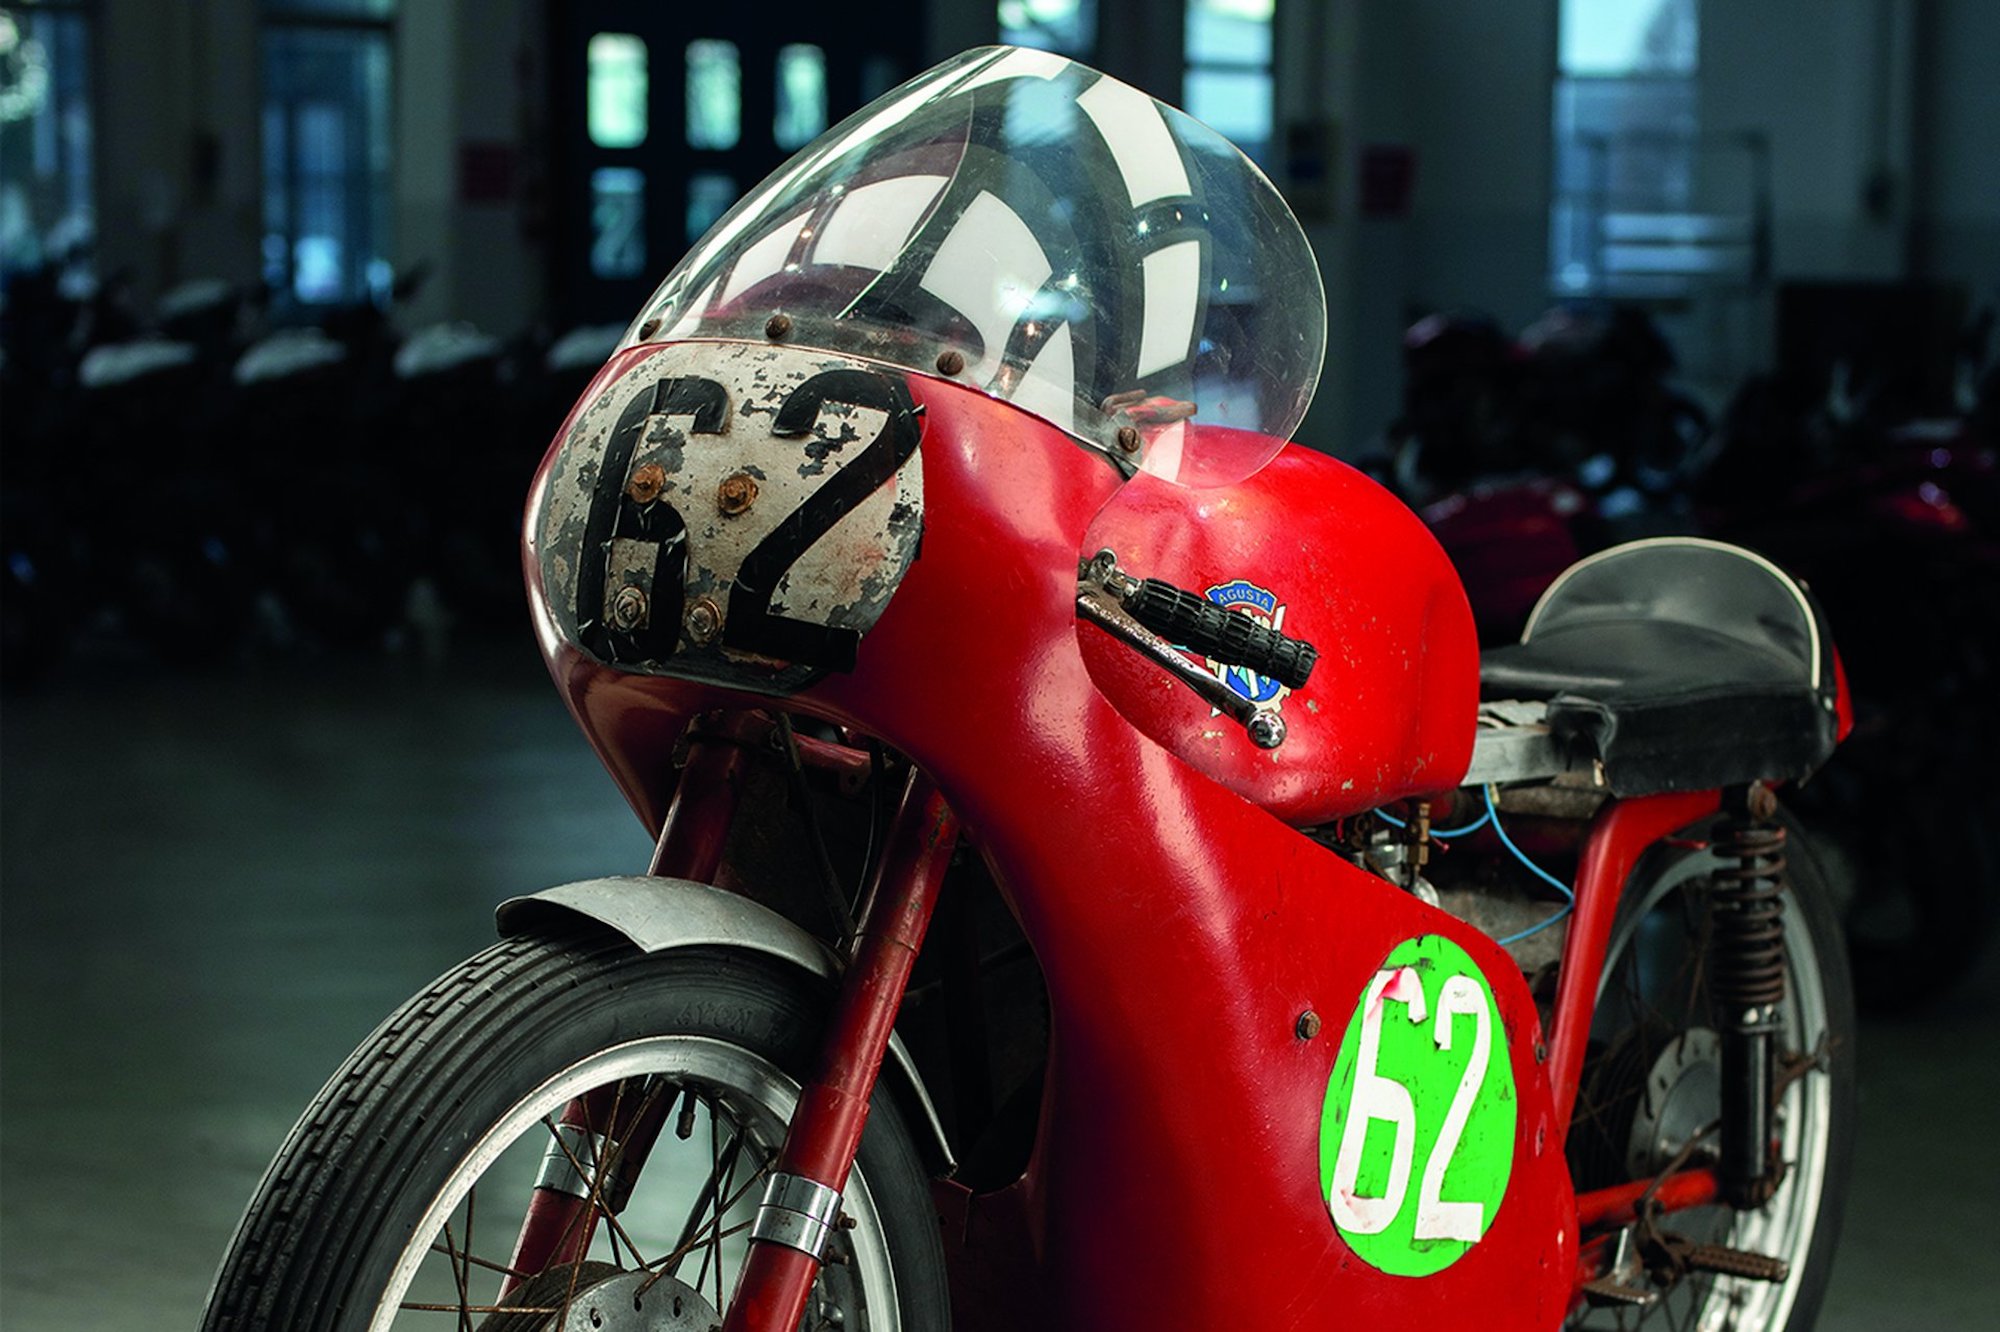 A retro MV Agusta bike, with more primed for the upcoming museum Agusta plans on resurrecting alongside plans for a refreshing of their plant. Media sourced from Ultimate Motorcycling.